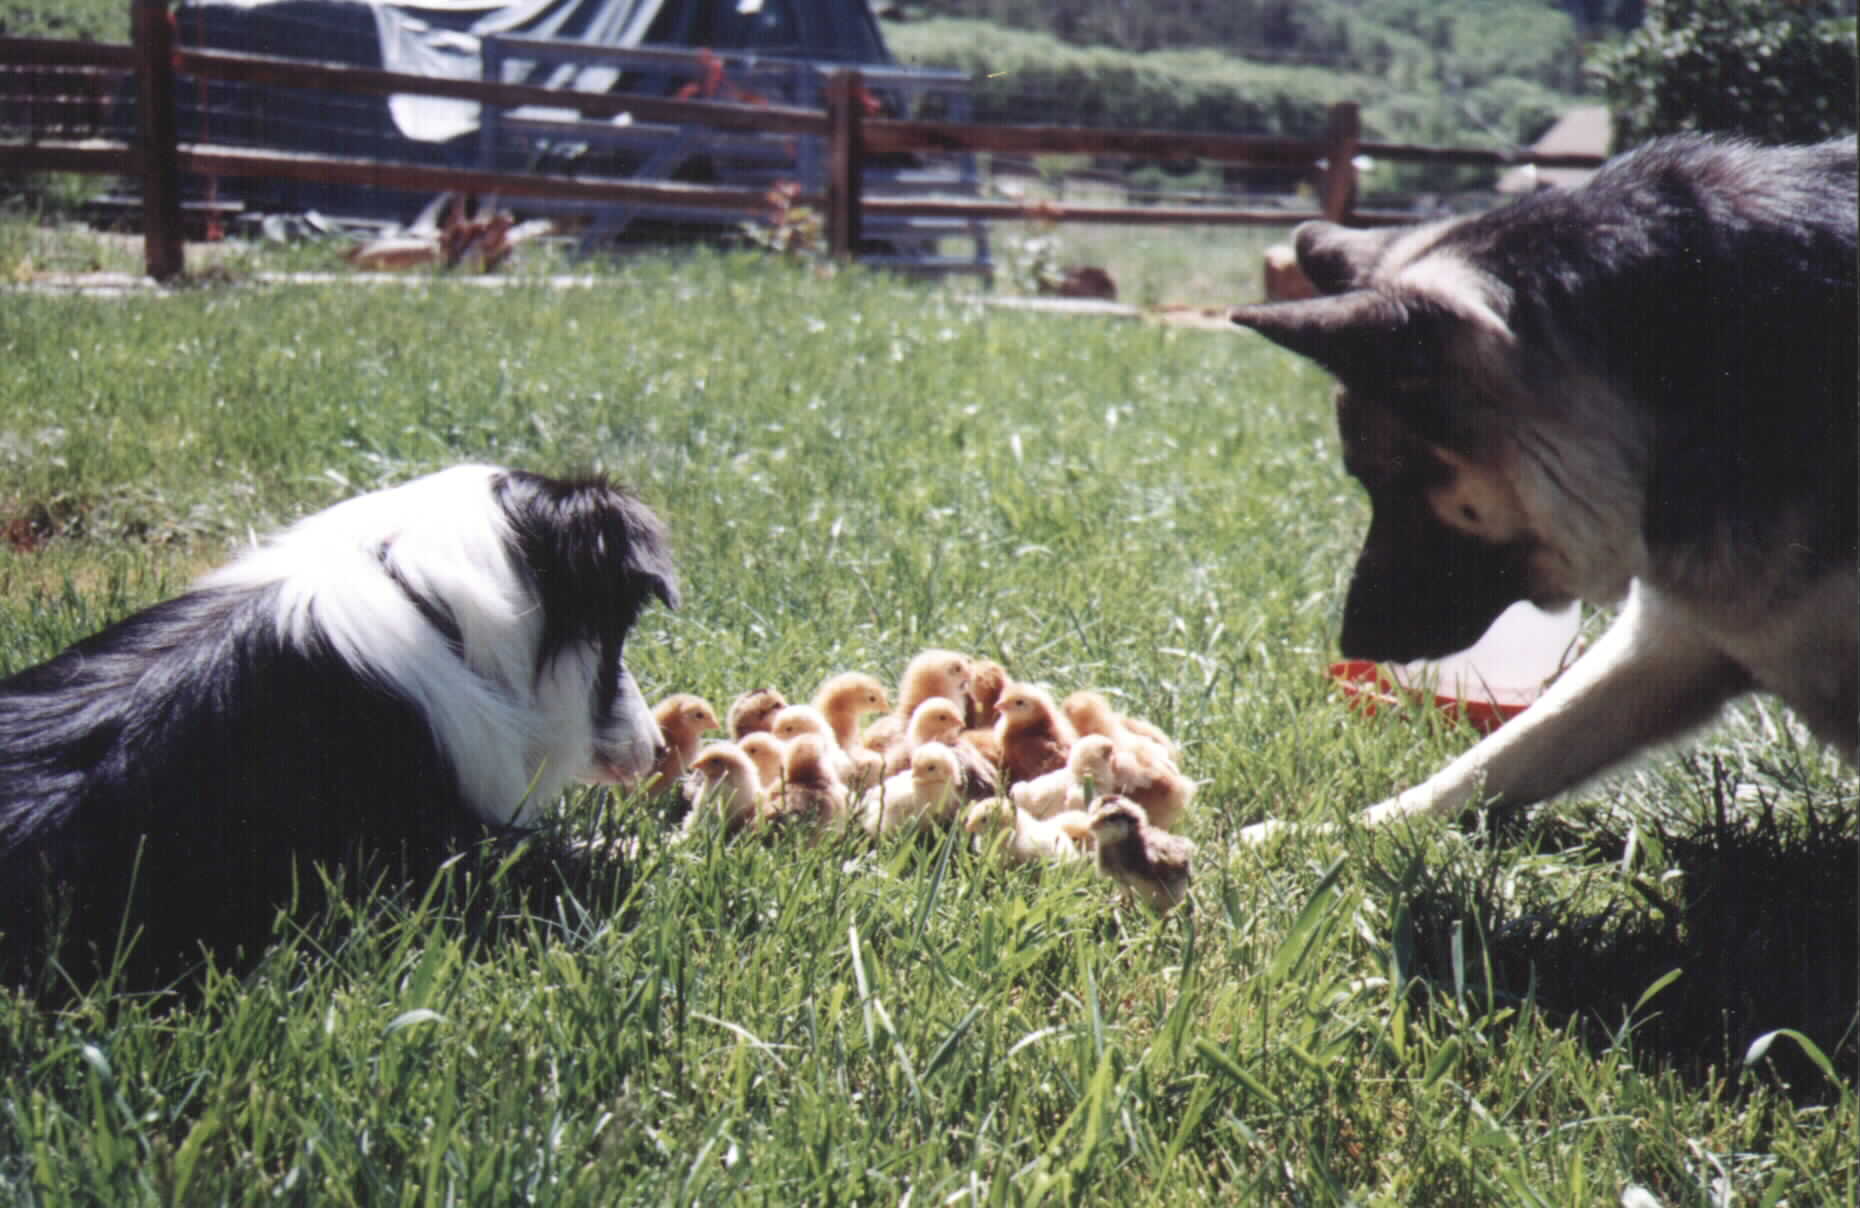 Dogs and chickens